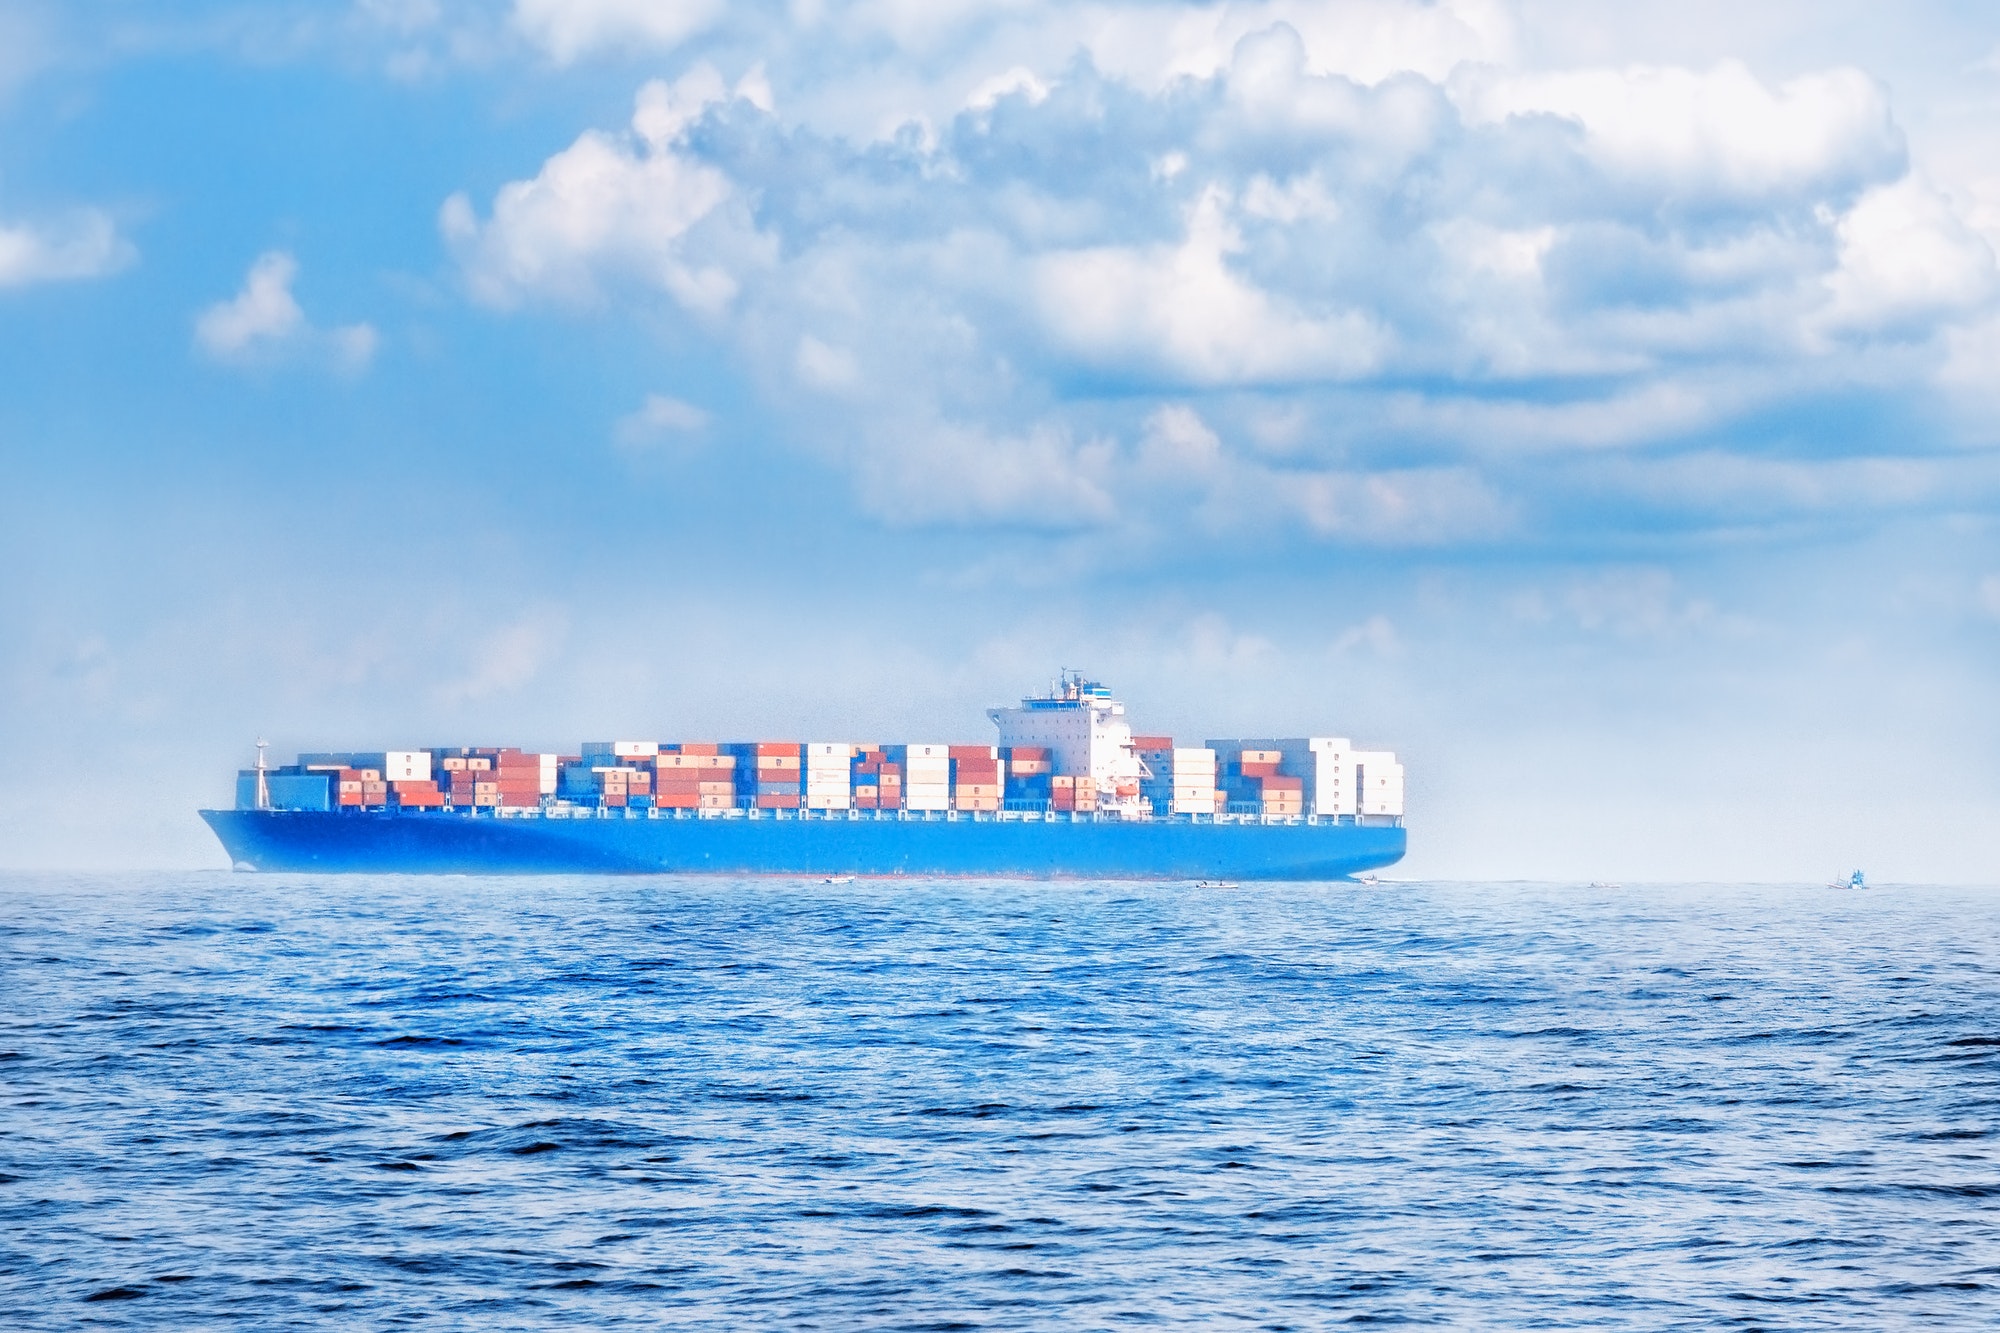 Large container cargo ship in the ocean